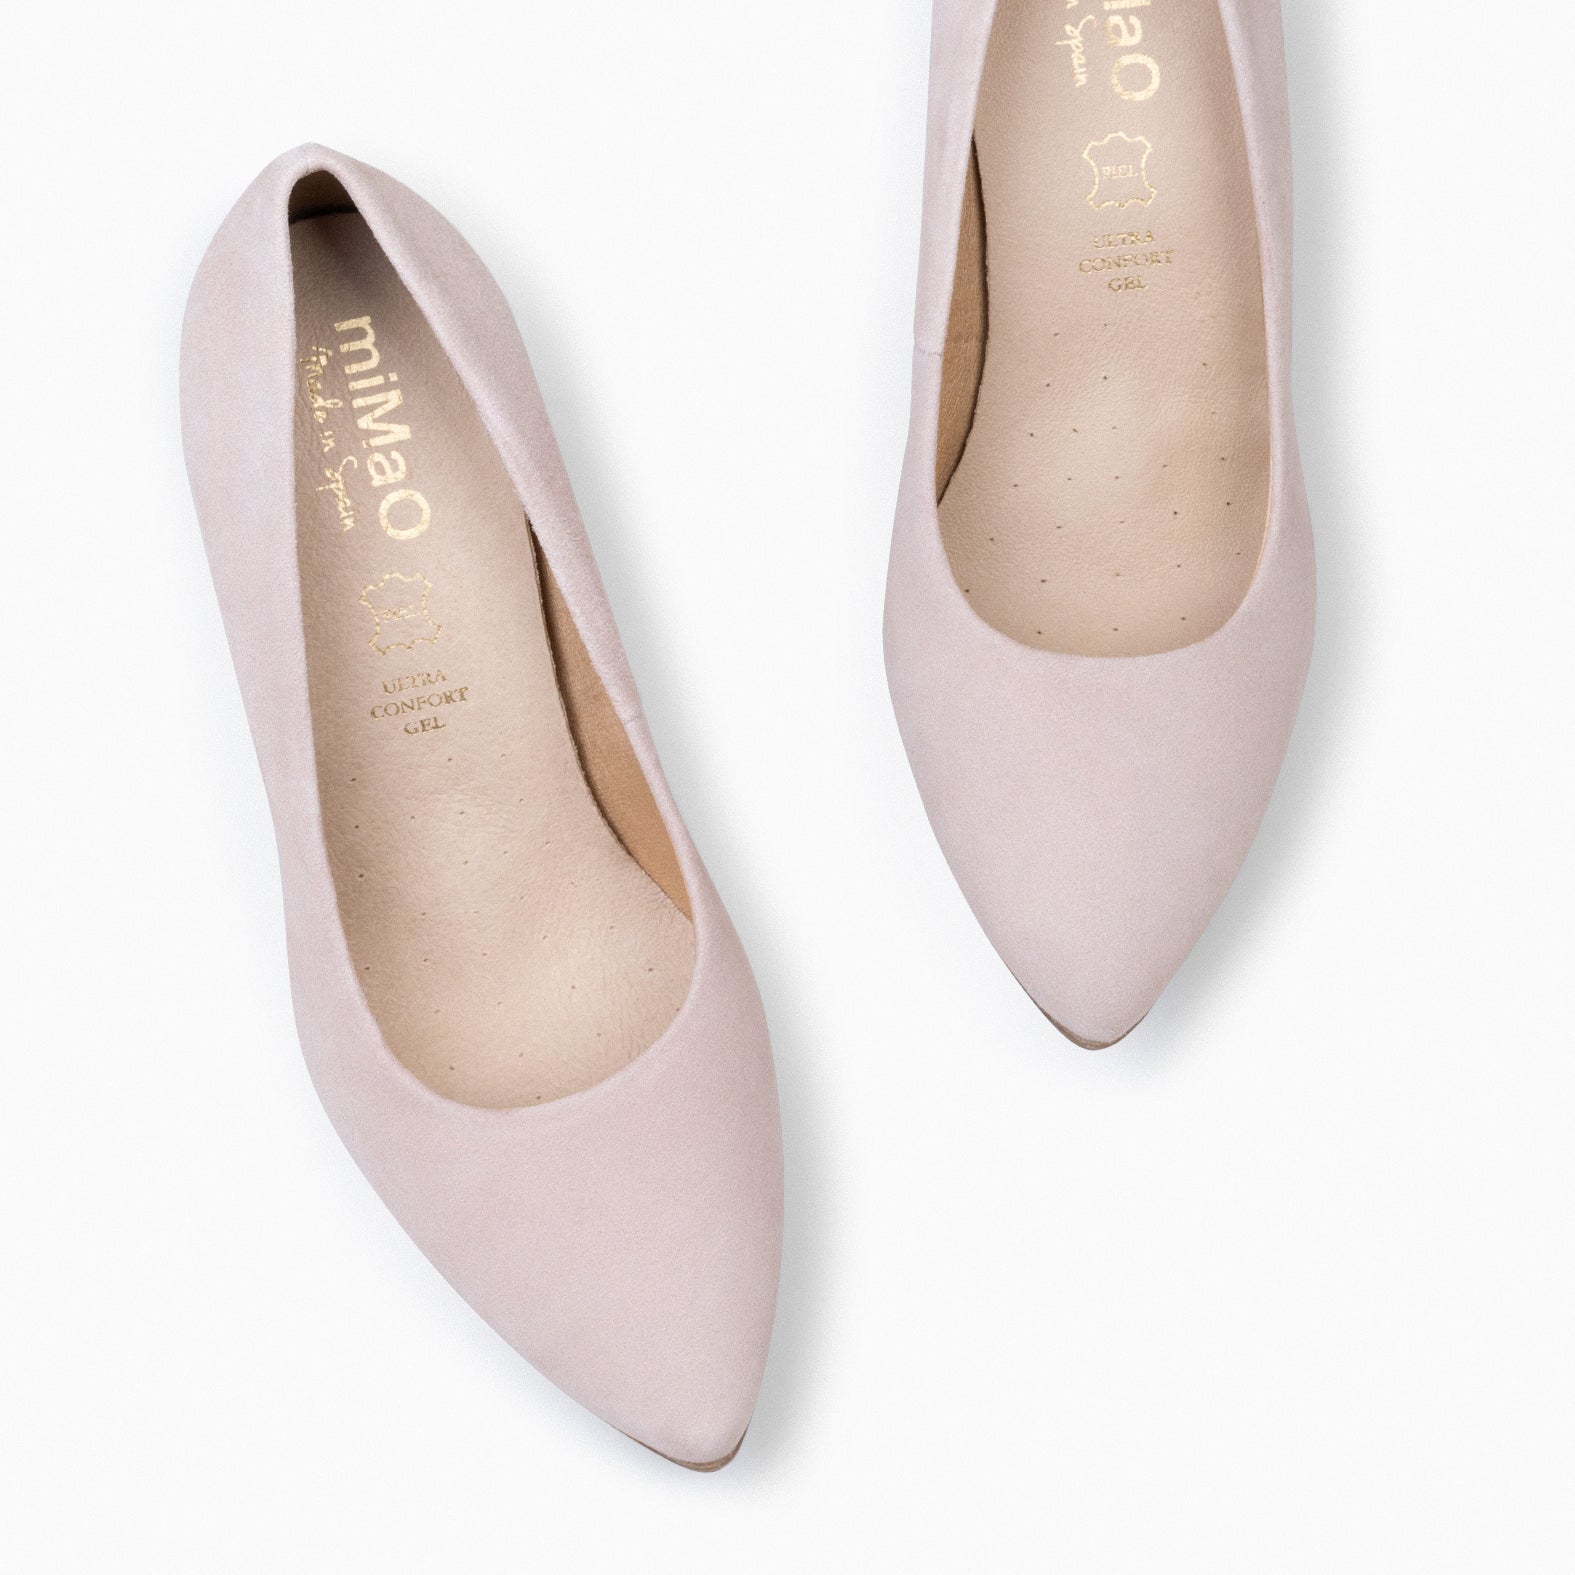 URBAN – NUDE Suede high-heeled shoes 